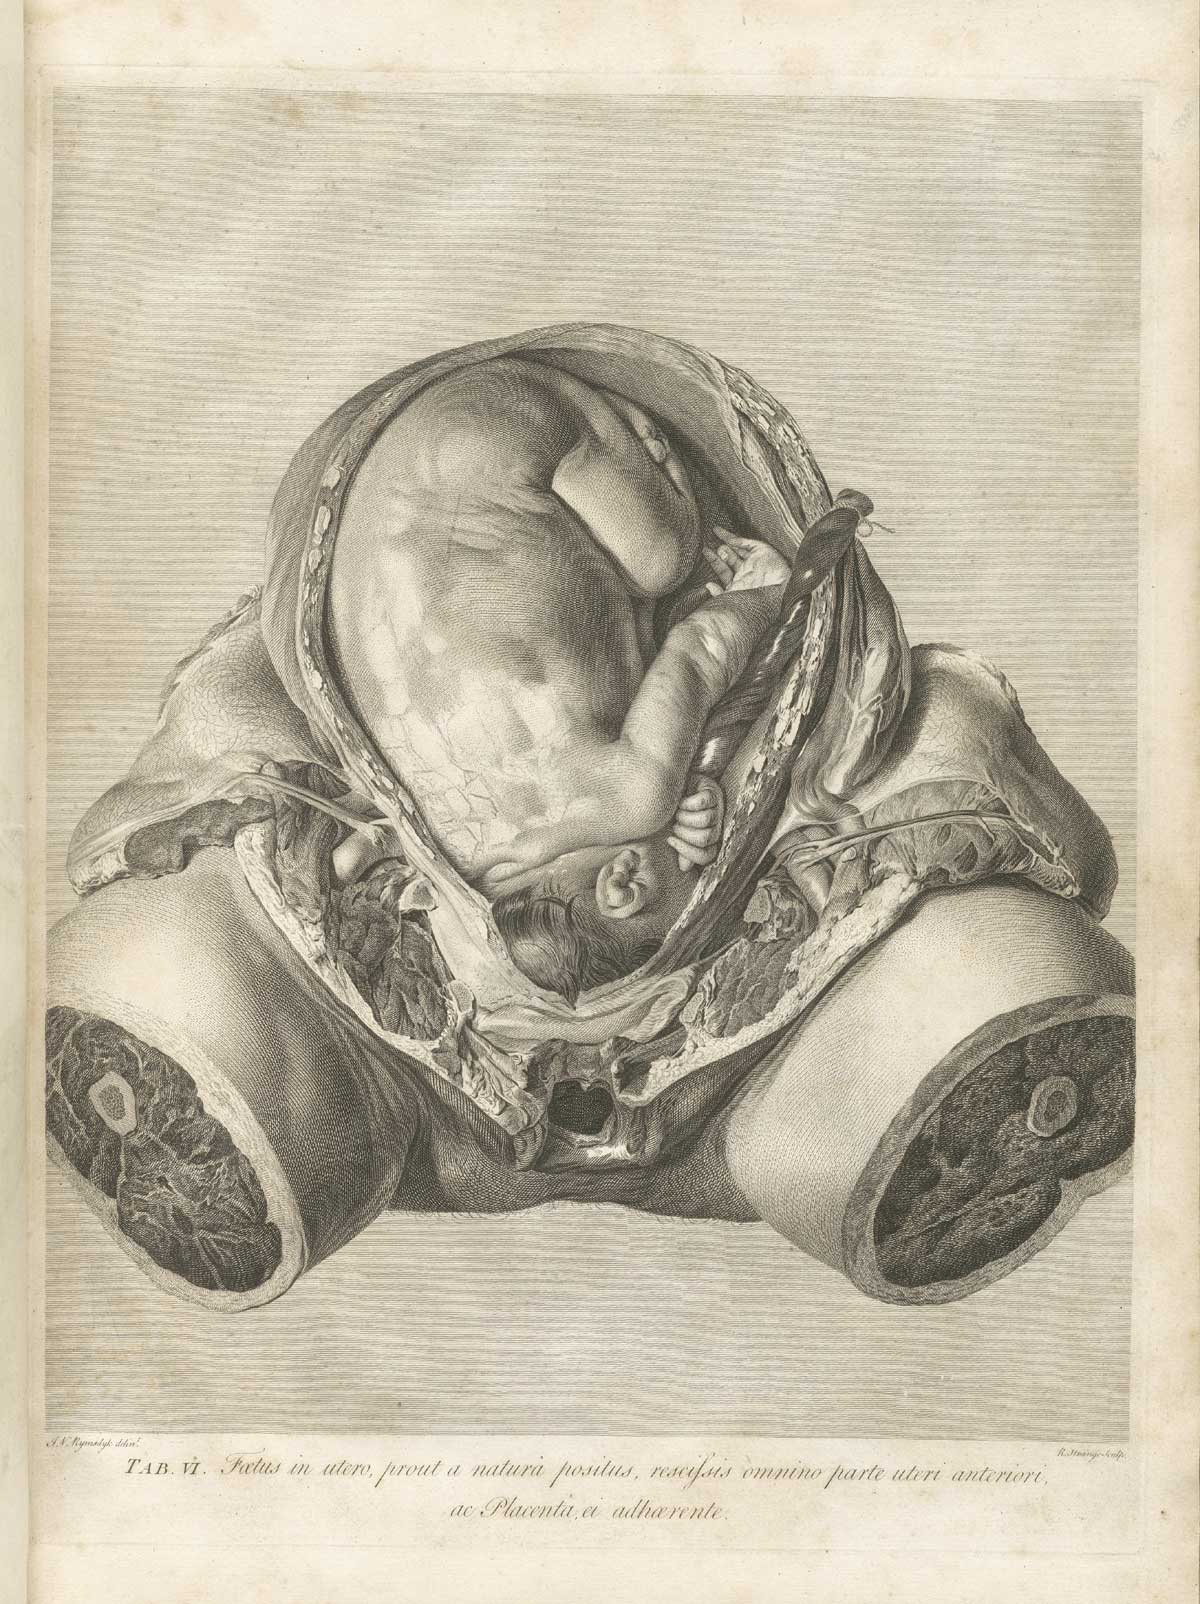 Table 6 of William Hunter's Anatomia uteri humani gravidi tabulis illustrata, featuring the frontal view of female dissected to expose a fetus within the gravid uterus.